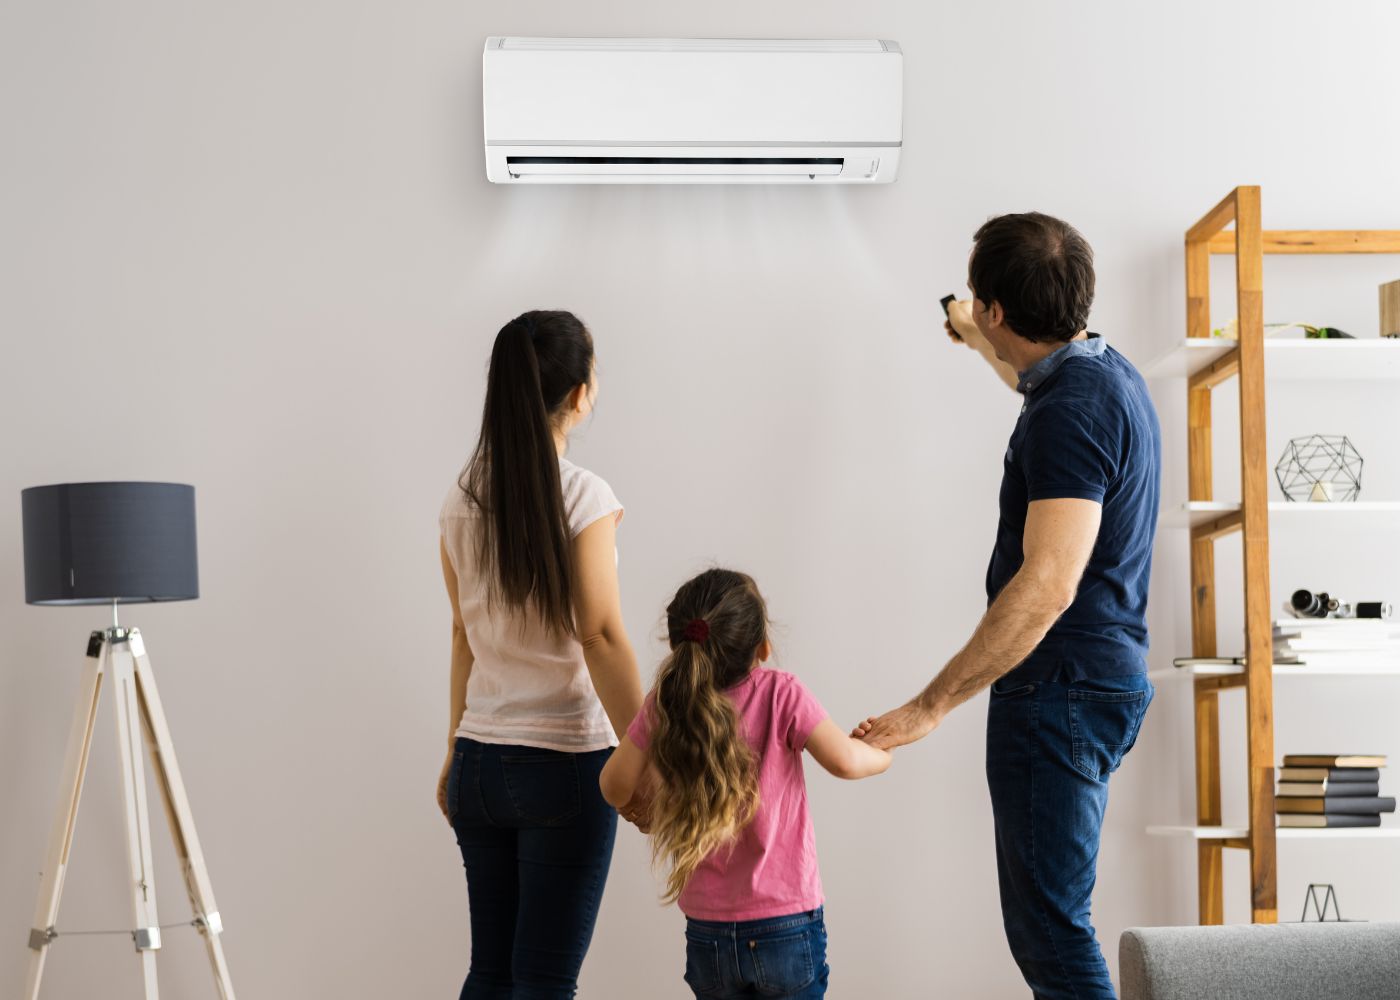 Should I install a small office air conditioner in my home